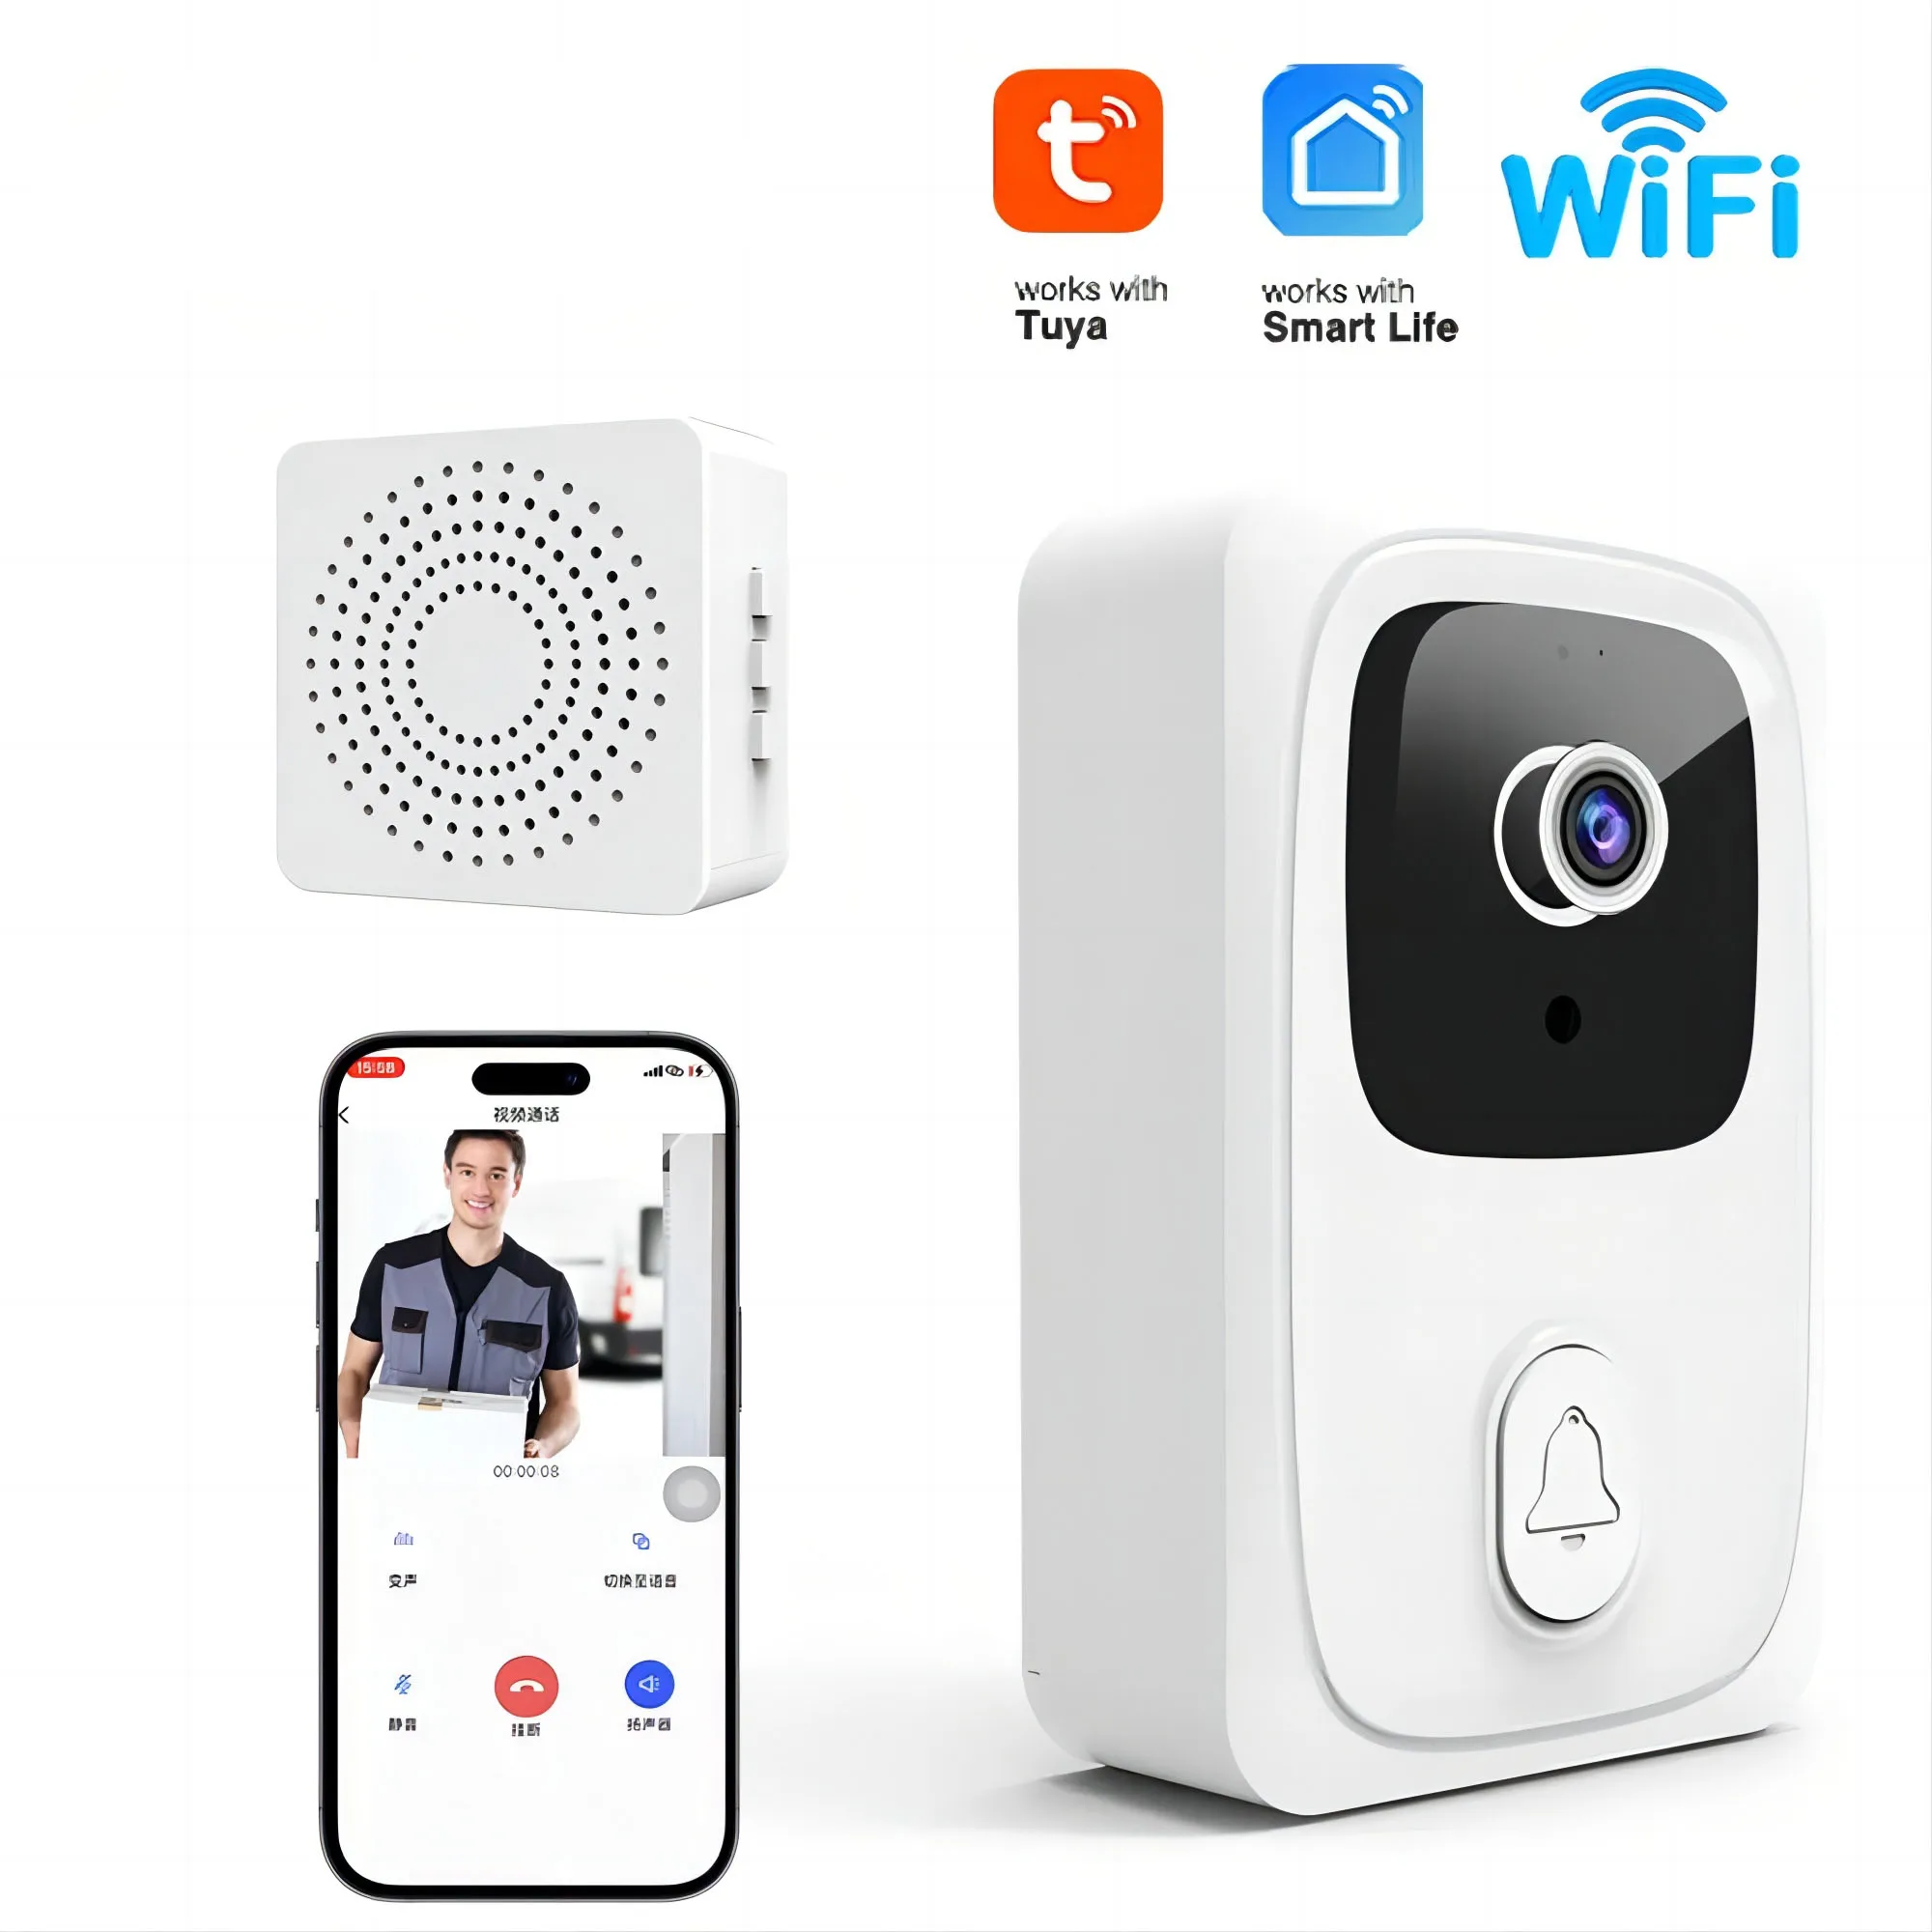 Tuya Video Doorbell Wireless WiFi Door Bell Camera Smart Home Security Night Vision Motion Detection Visual Intercom with Chime wireless wifi doorbell camera waterproof hd video door bell smart wireless doorbell outdoor with camera night vision